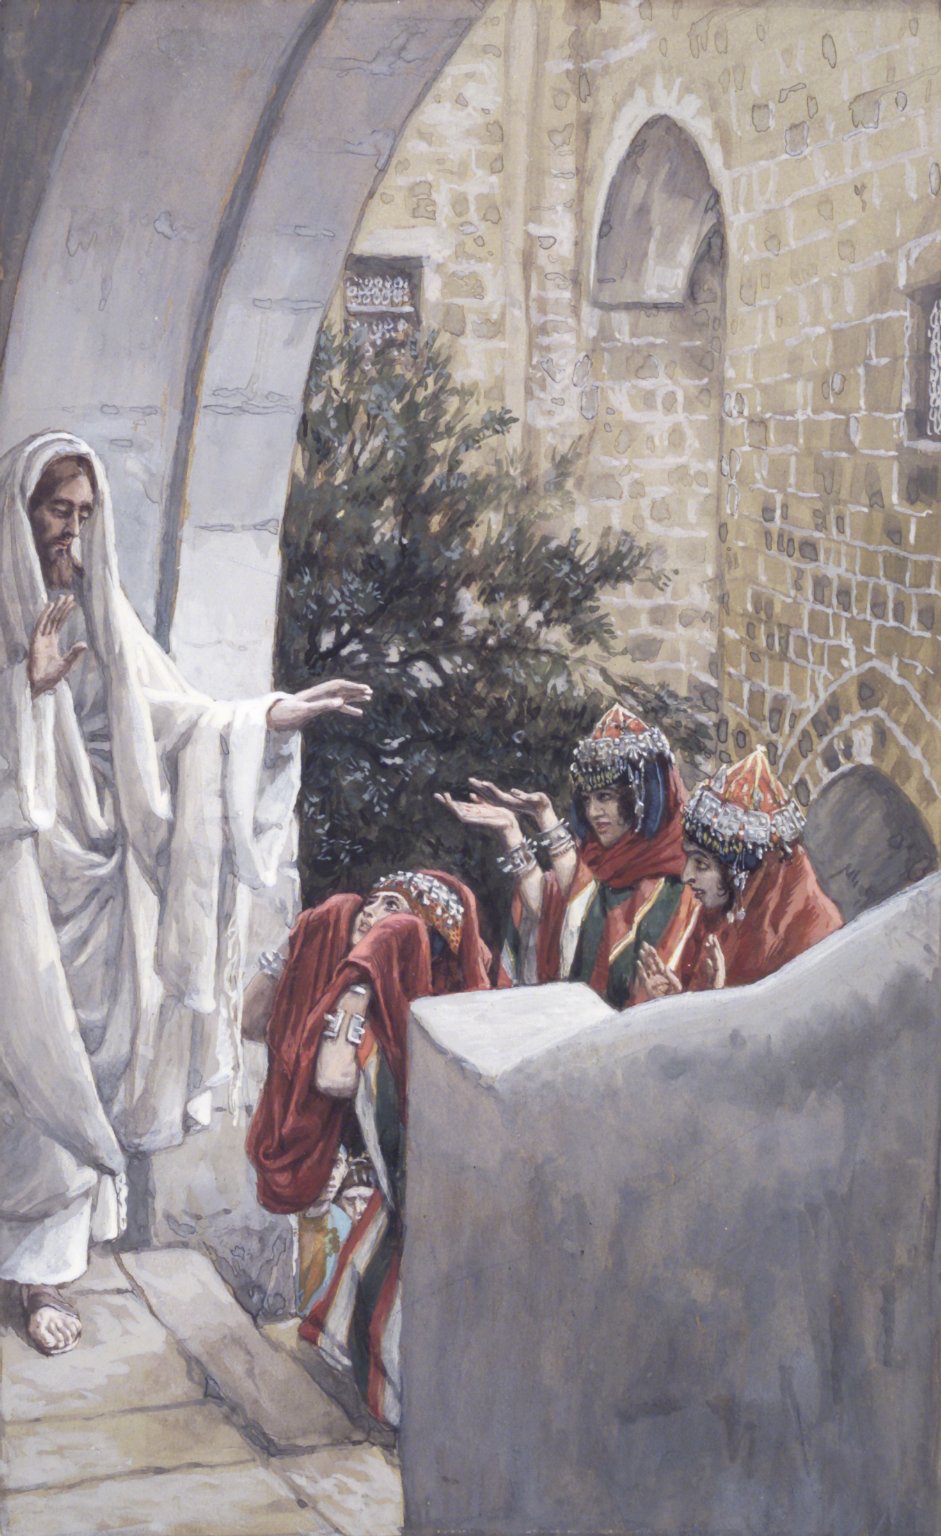 The Canaanite's Daughter (La Chananéenne) by James Tissot, c. 1890 [Brooklyn Museum]